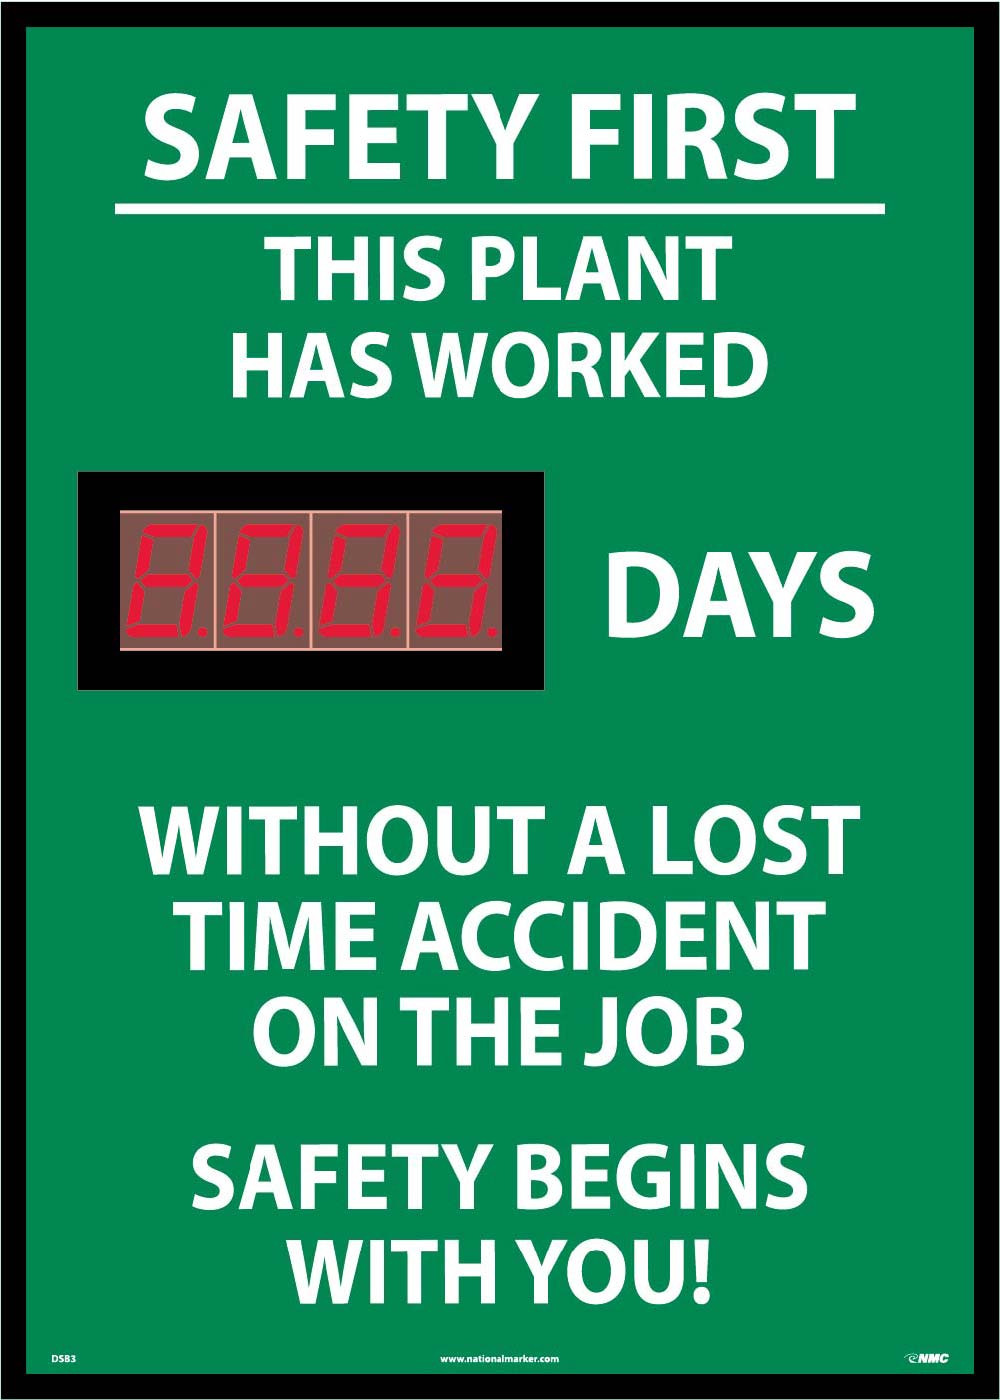 Safety First This Plant Has Worked Digital Scoreboard-eSafety Supplies, Inc